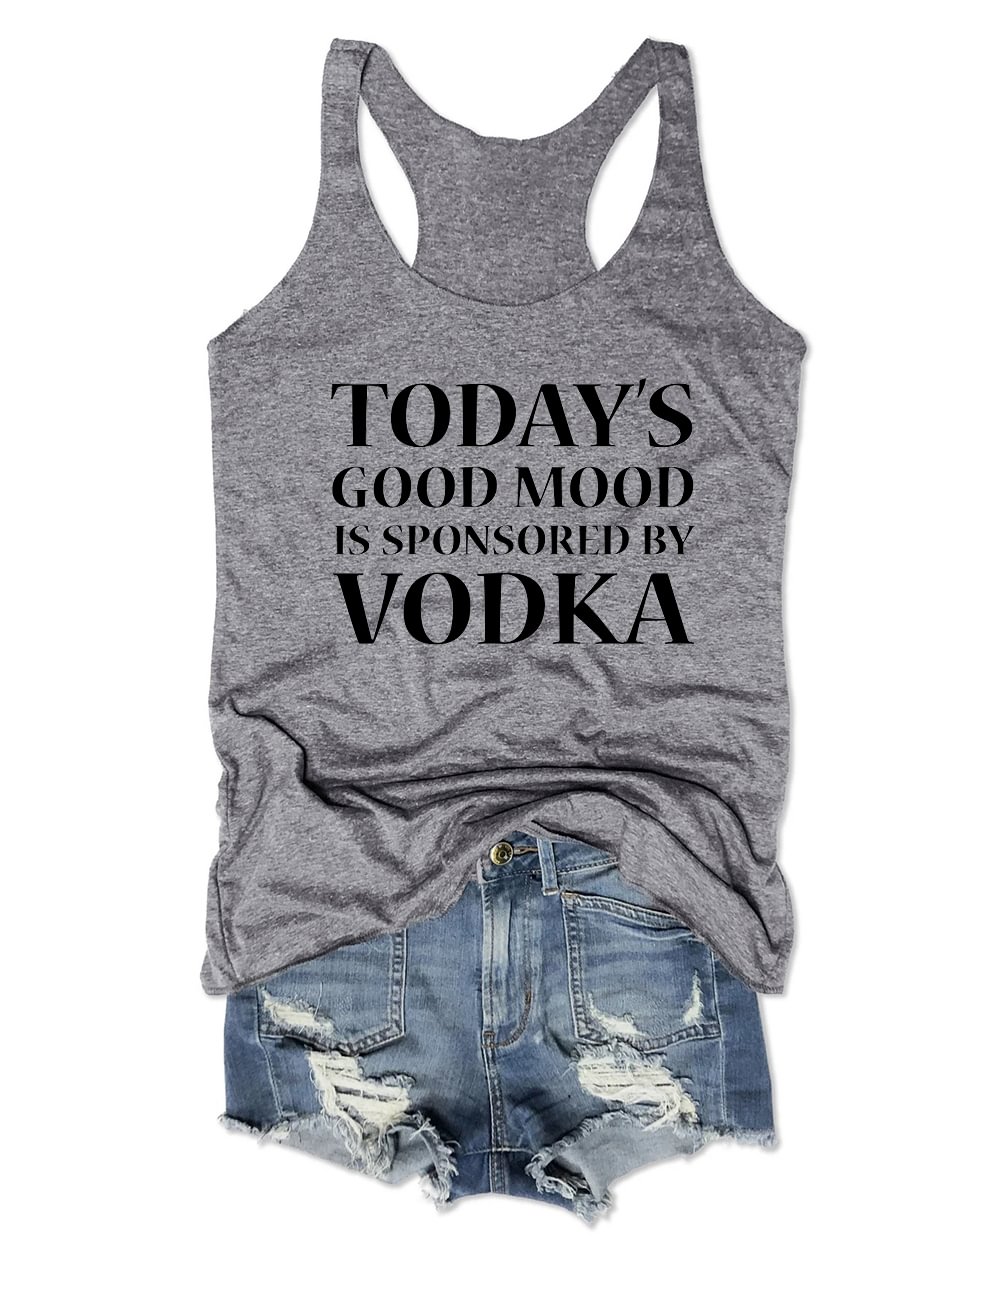 Today's Good Mood is Sponsored by Vodka Tank